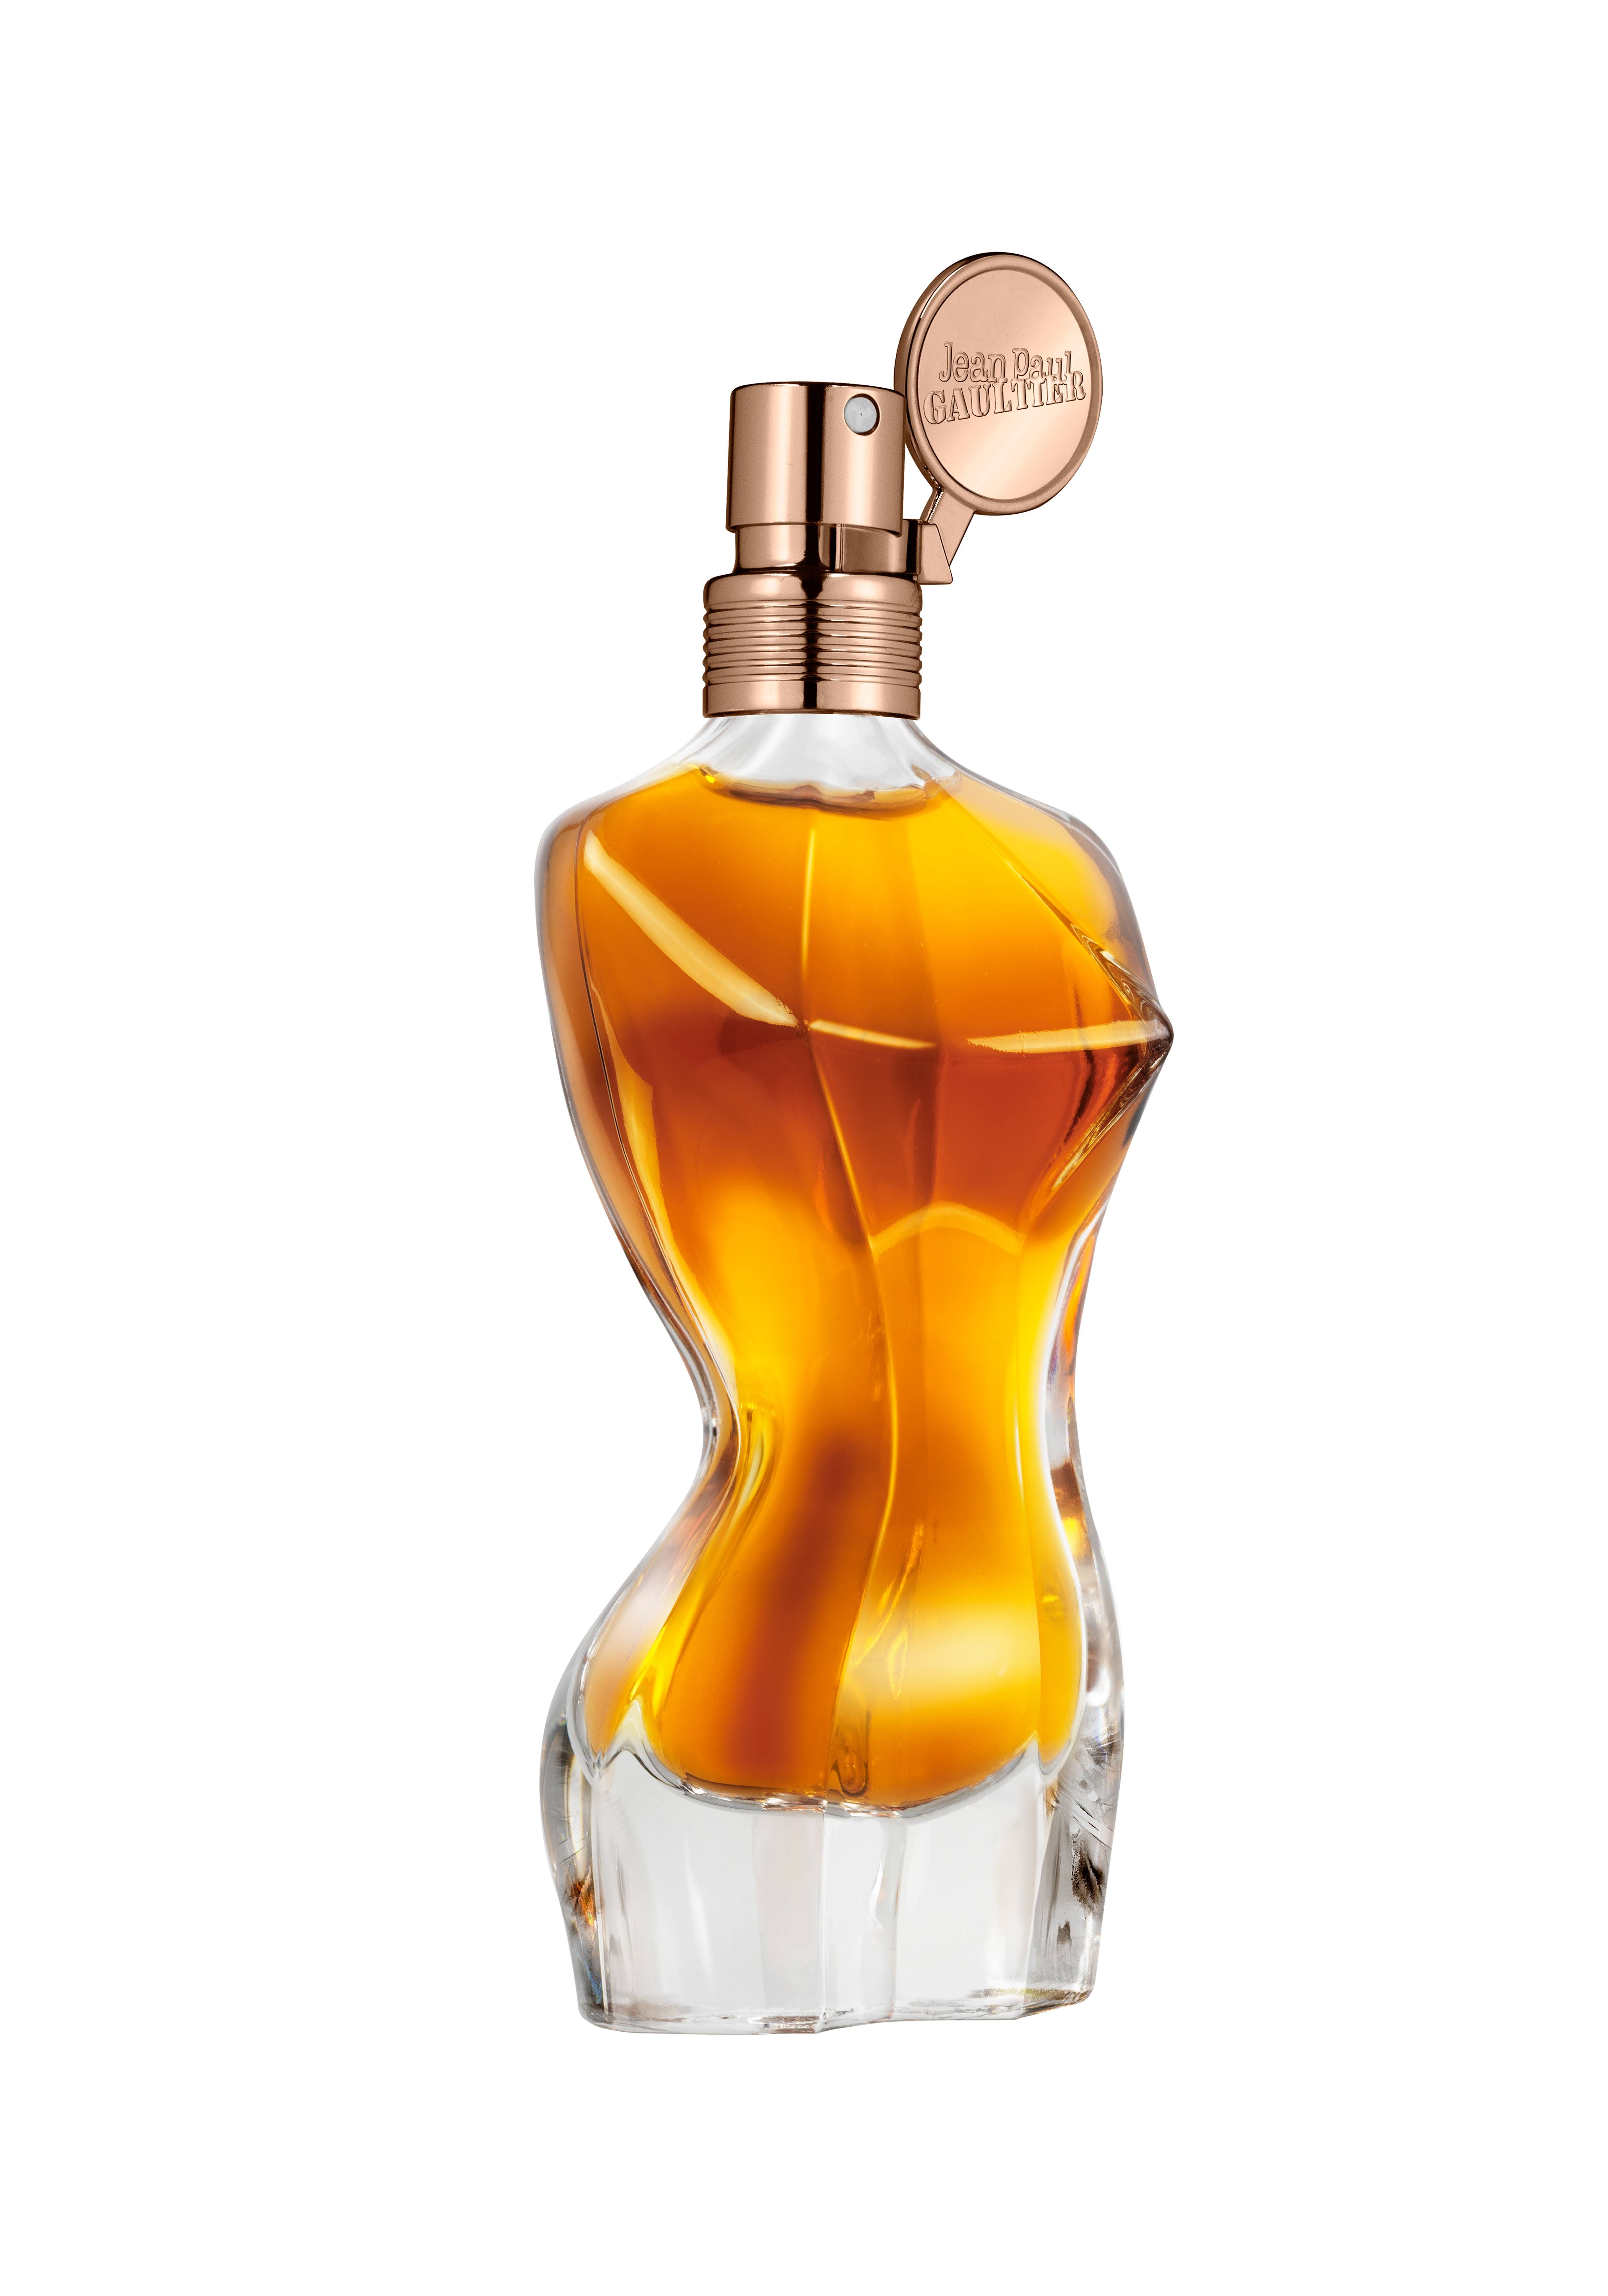 Jean Paul Gaultier Essence Perfume: Radiant Floral-Woody Scents for Women | Image